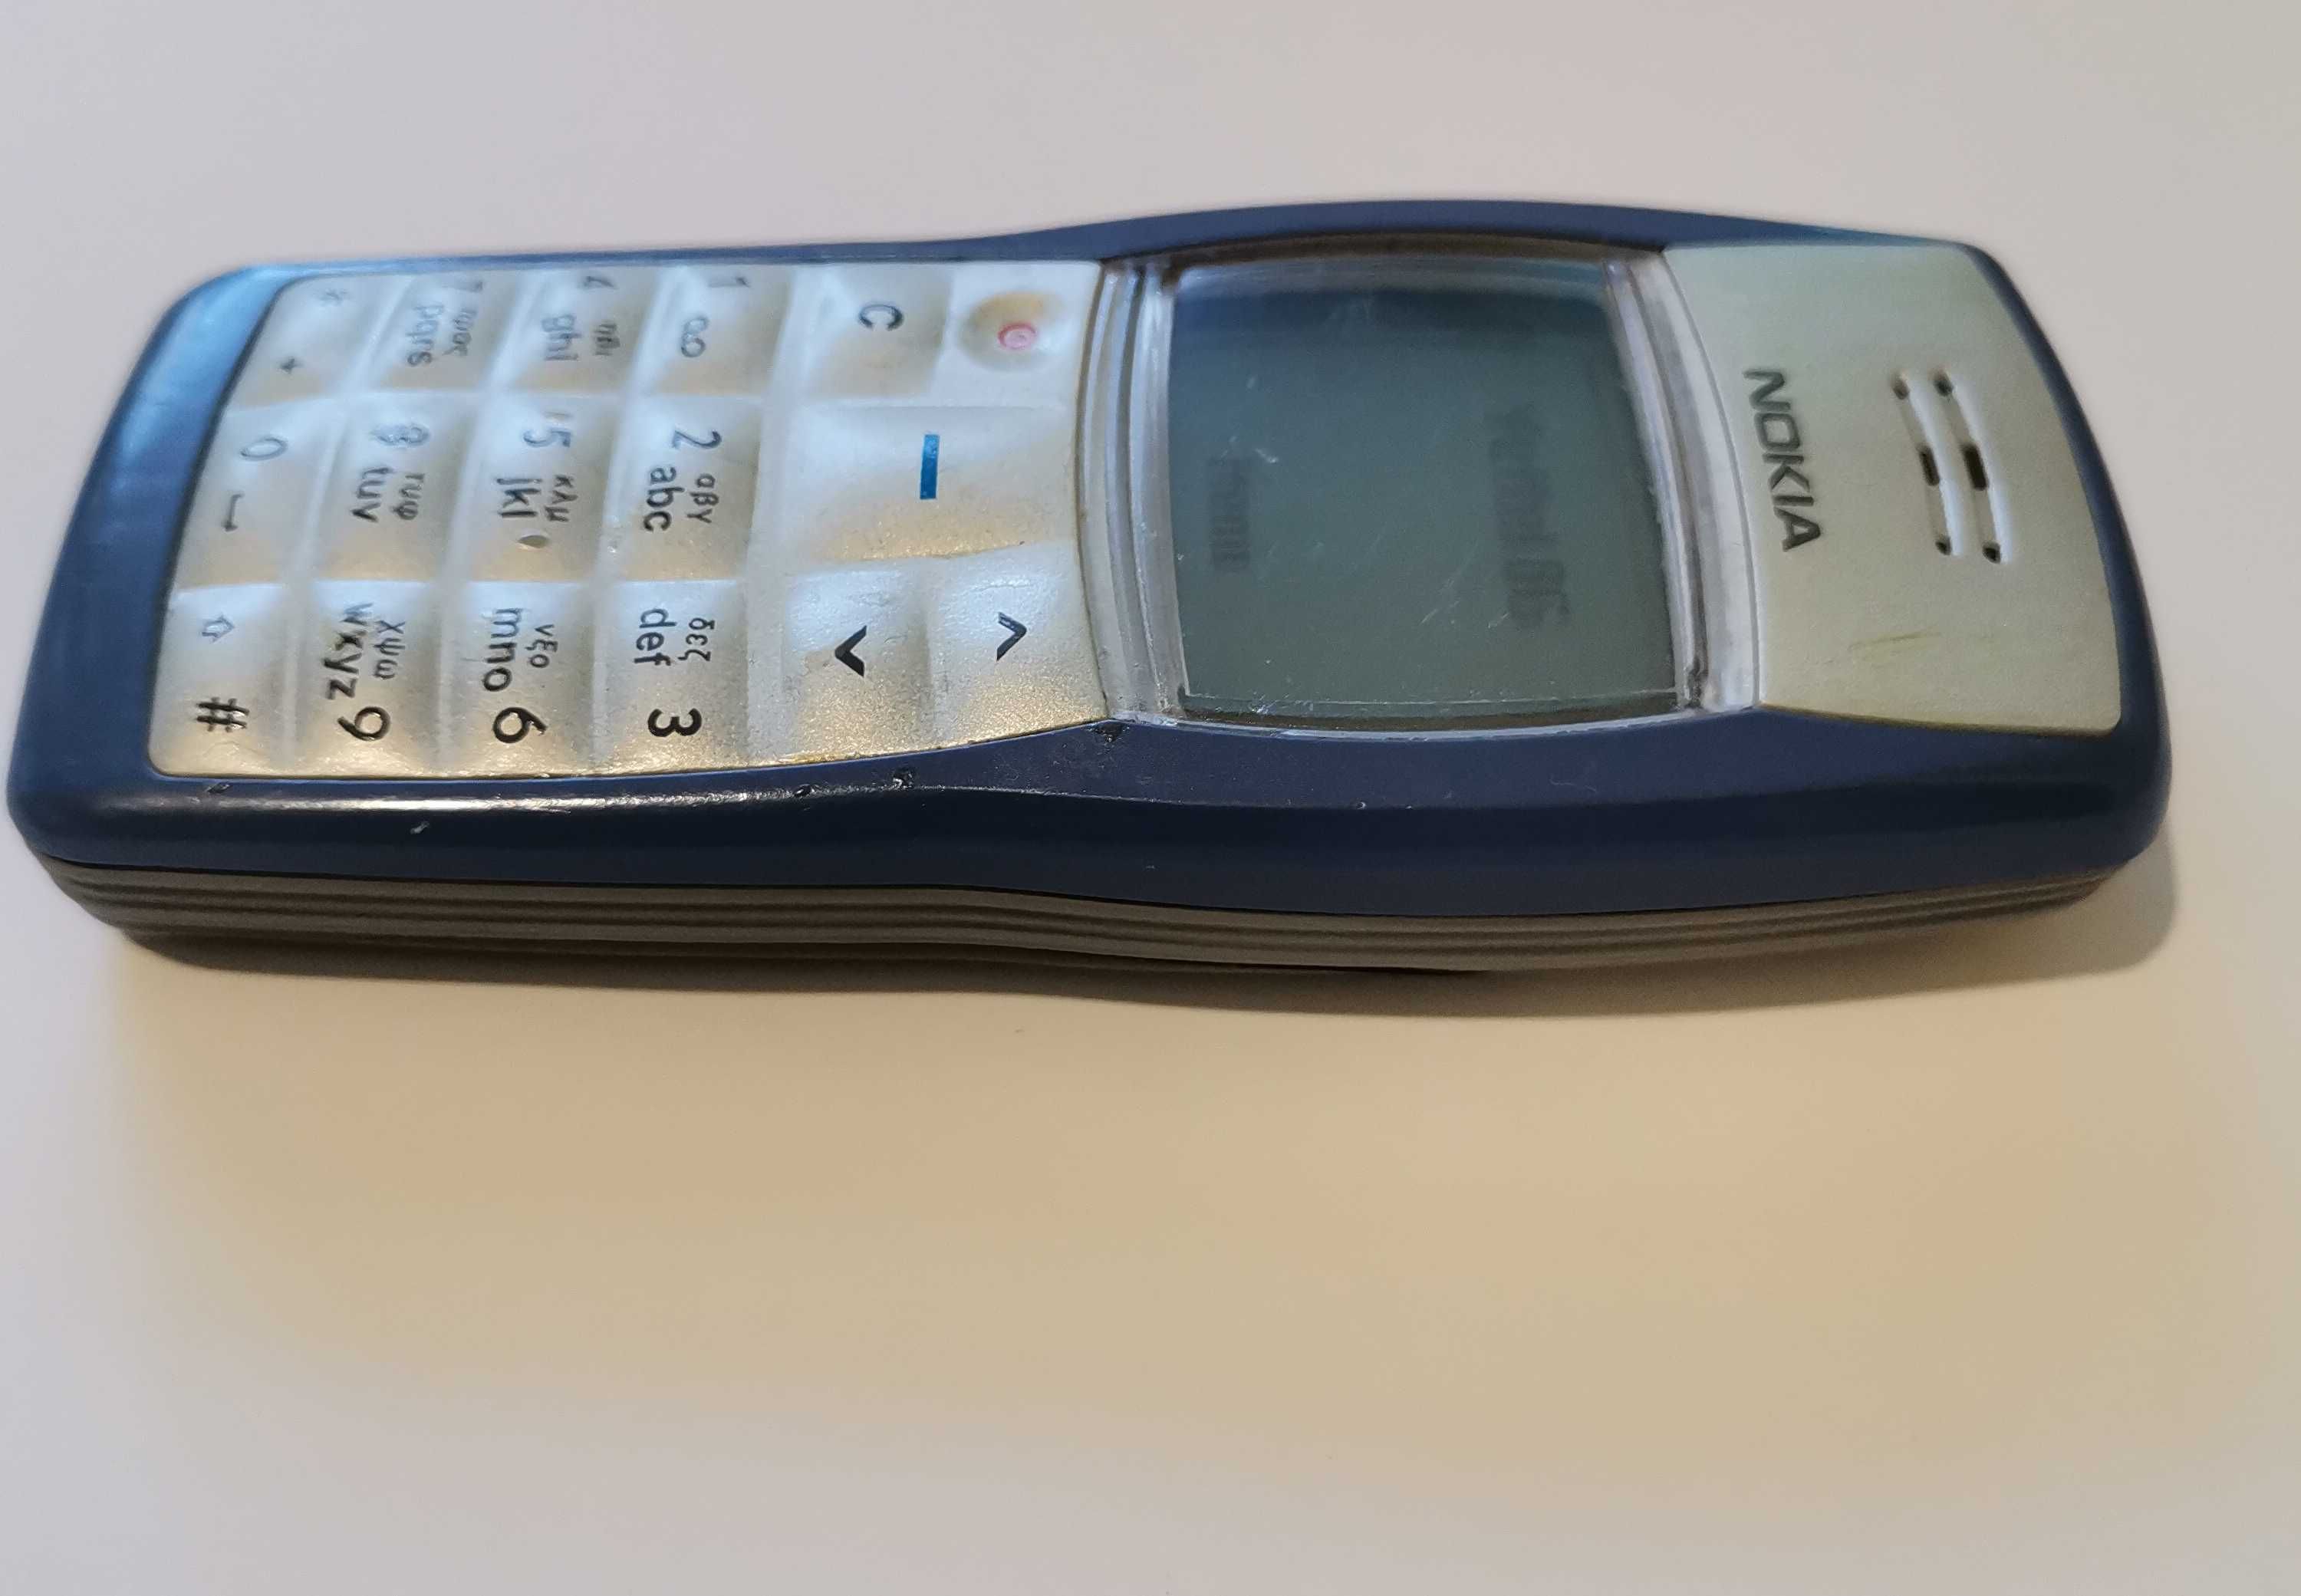 Nokia 1100 RH-18 Made in Germany